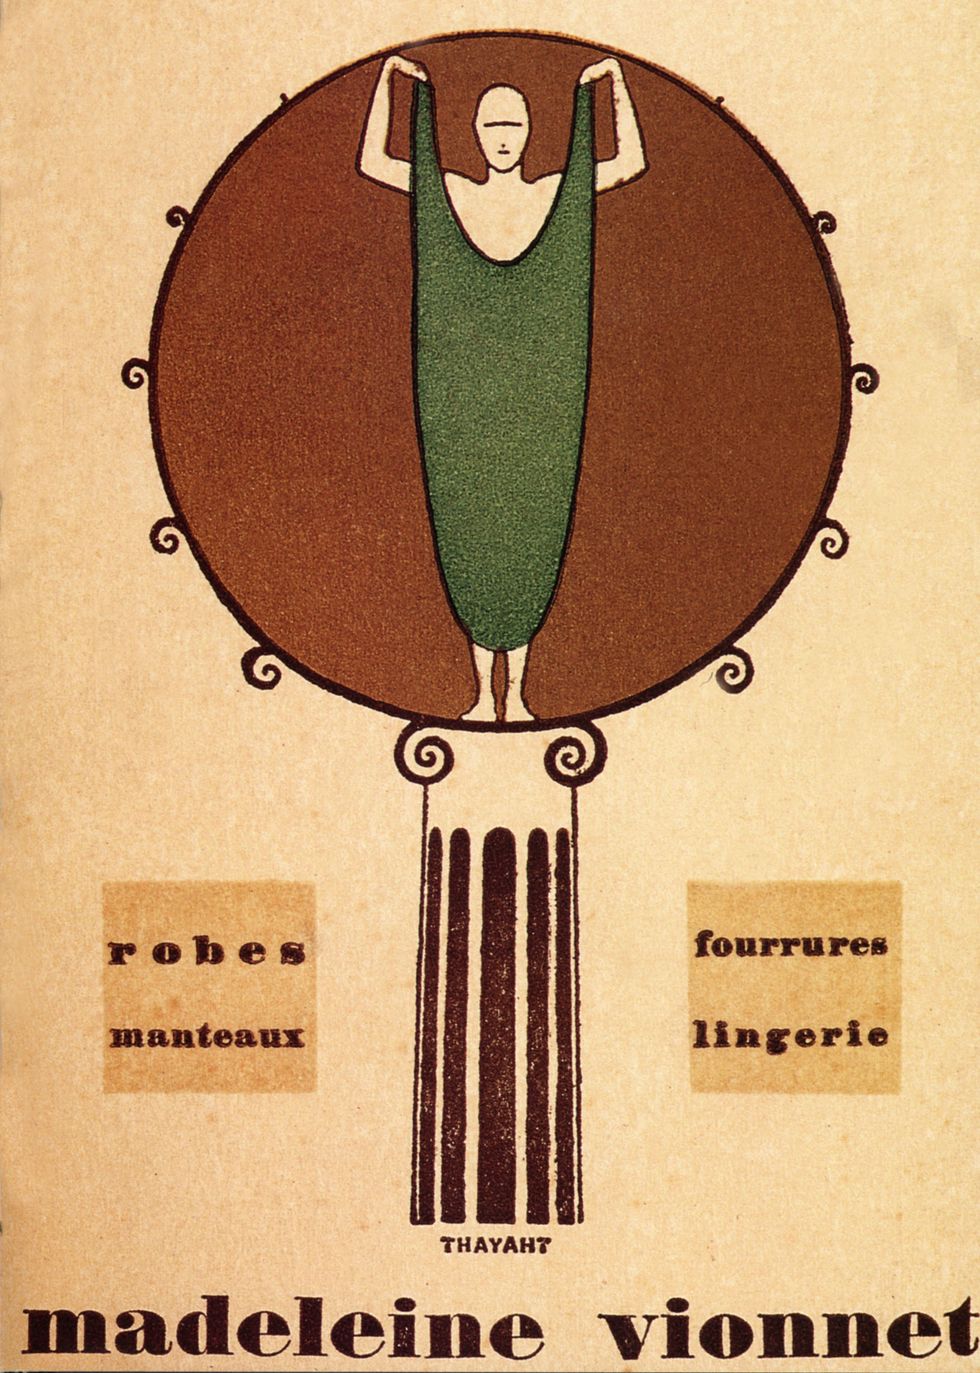 Poster for creations by Madeleine Vionnet (dresses, coats, furs, underweras), 1919